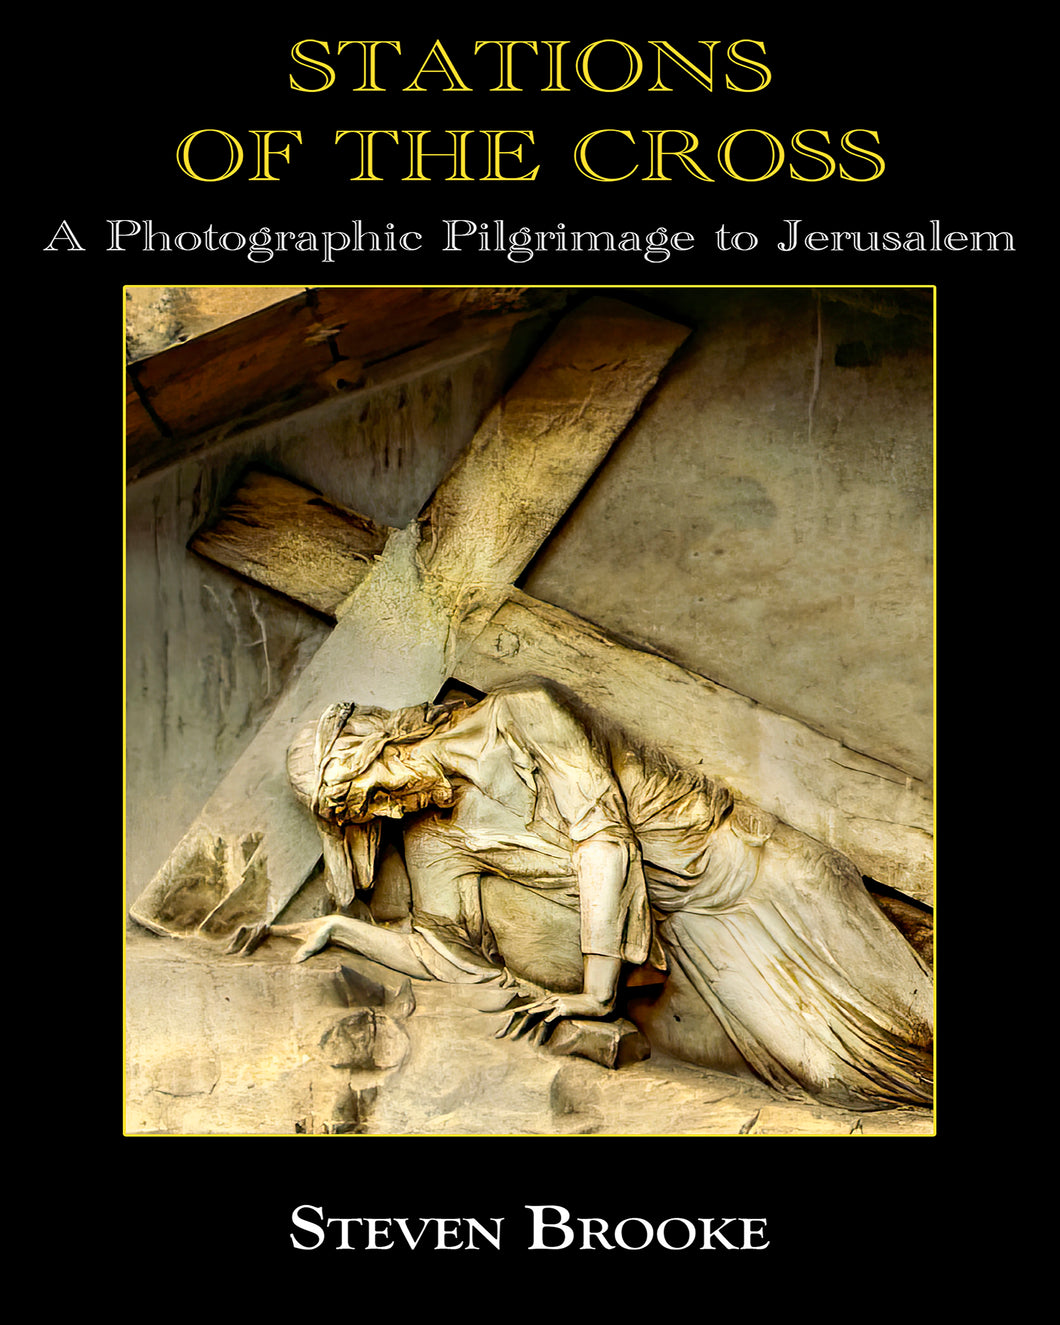 Stations of the Cross - A Photographic Pilgrimage to Jerusalem